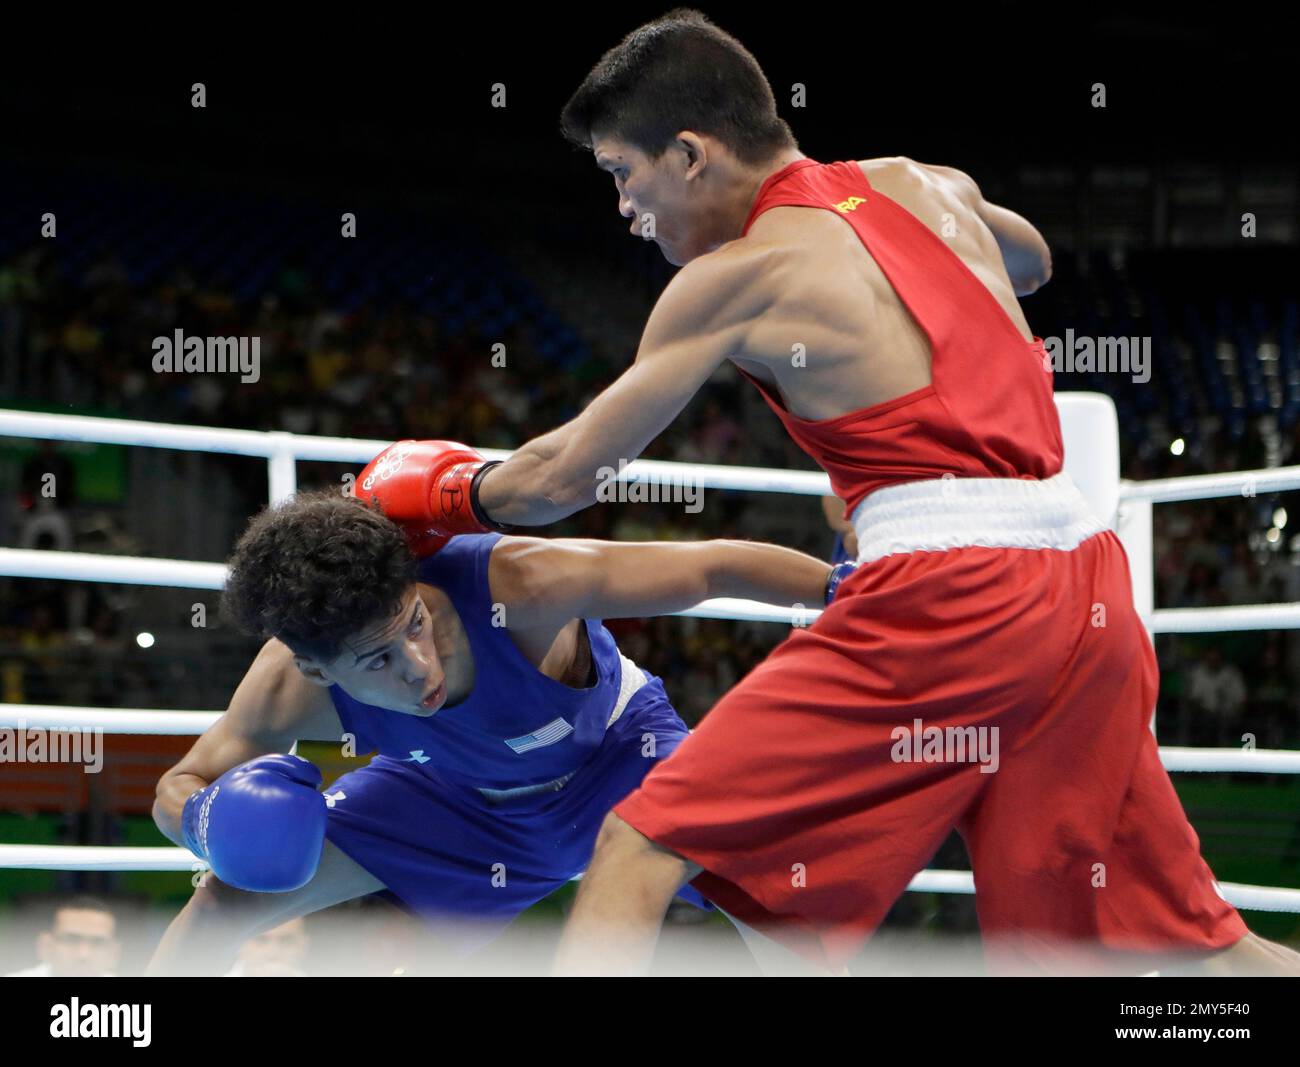 United States' Antonio Vargas, left, fights Brazil's Juliao Neto during a men's flyweight 52-kg preliminary boxing match at the 2016 Summer Olympics in Rio de Janeiro, Brazil, Saturday, Aug. 13, 2016. (AP Photo/Frank Franklin II) Stock Photo